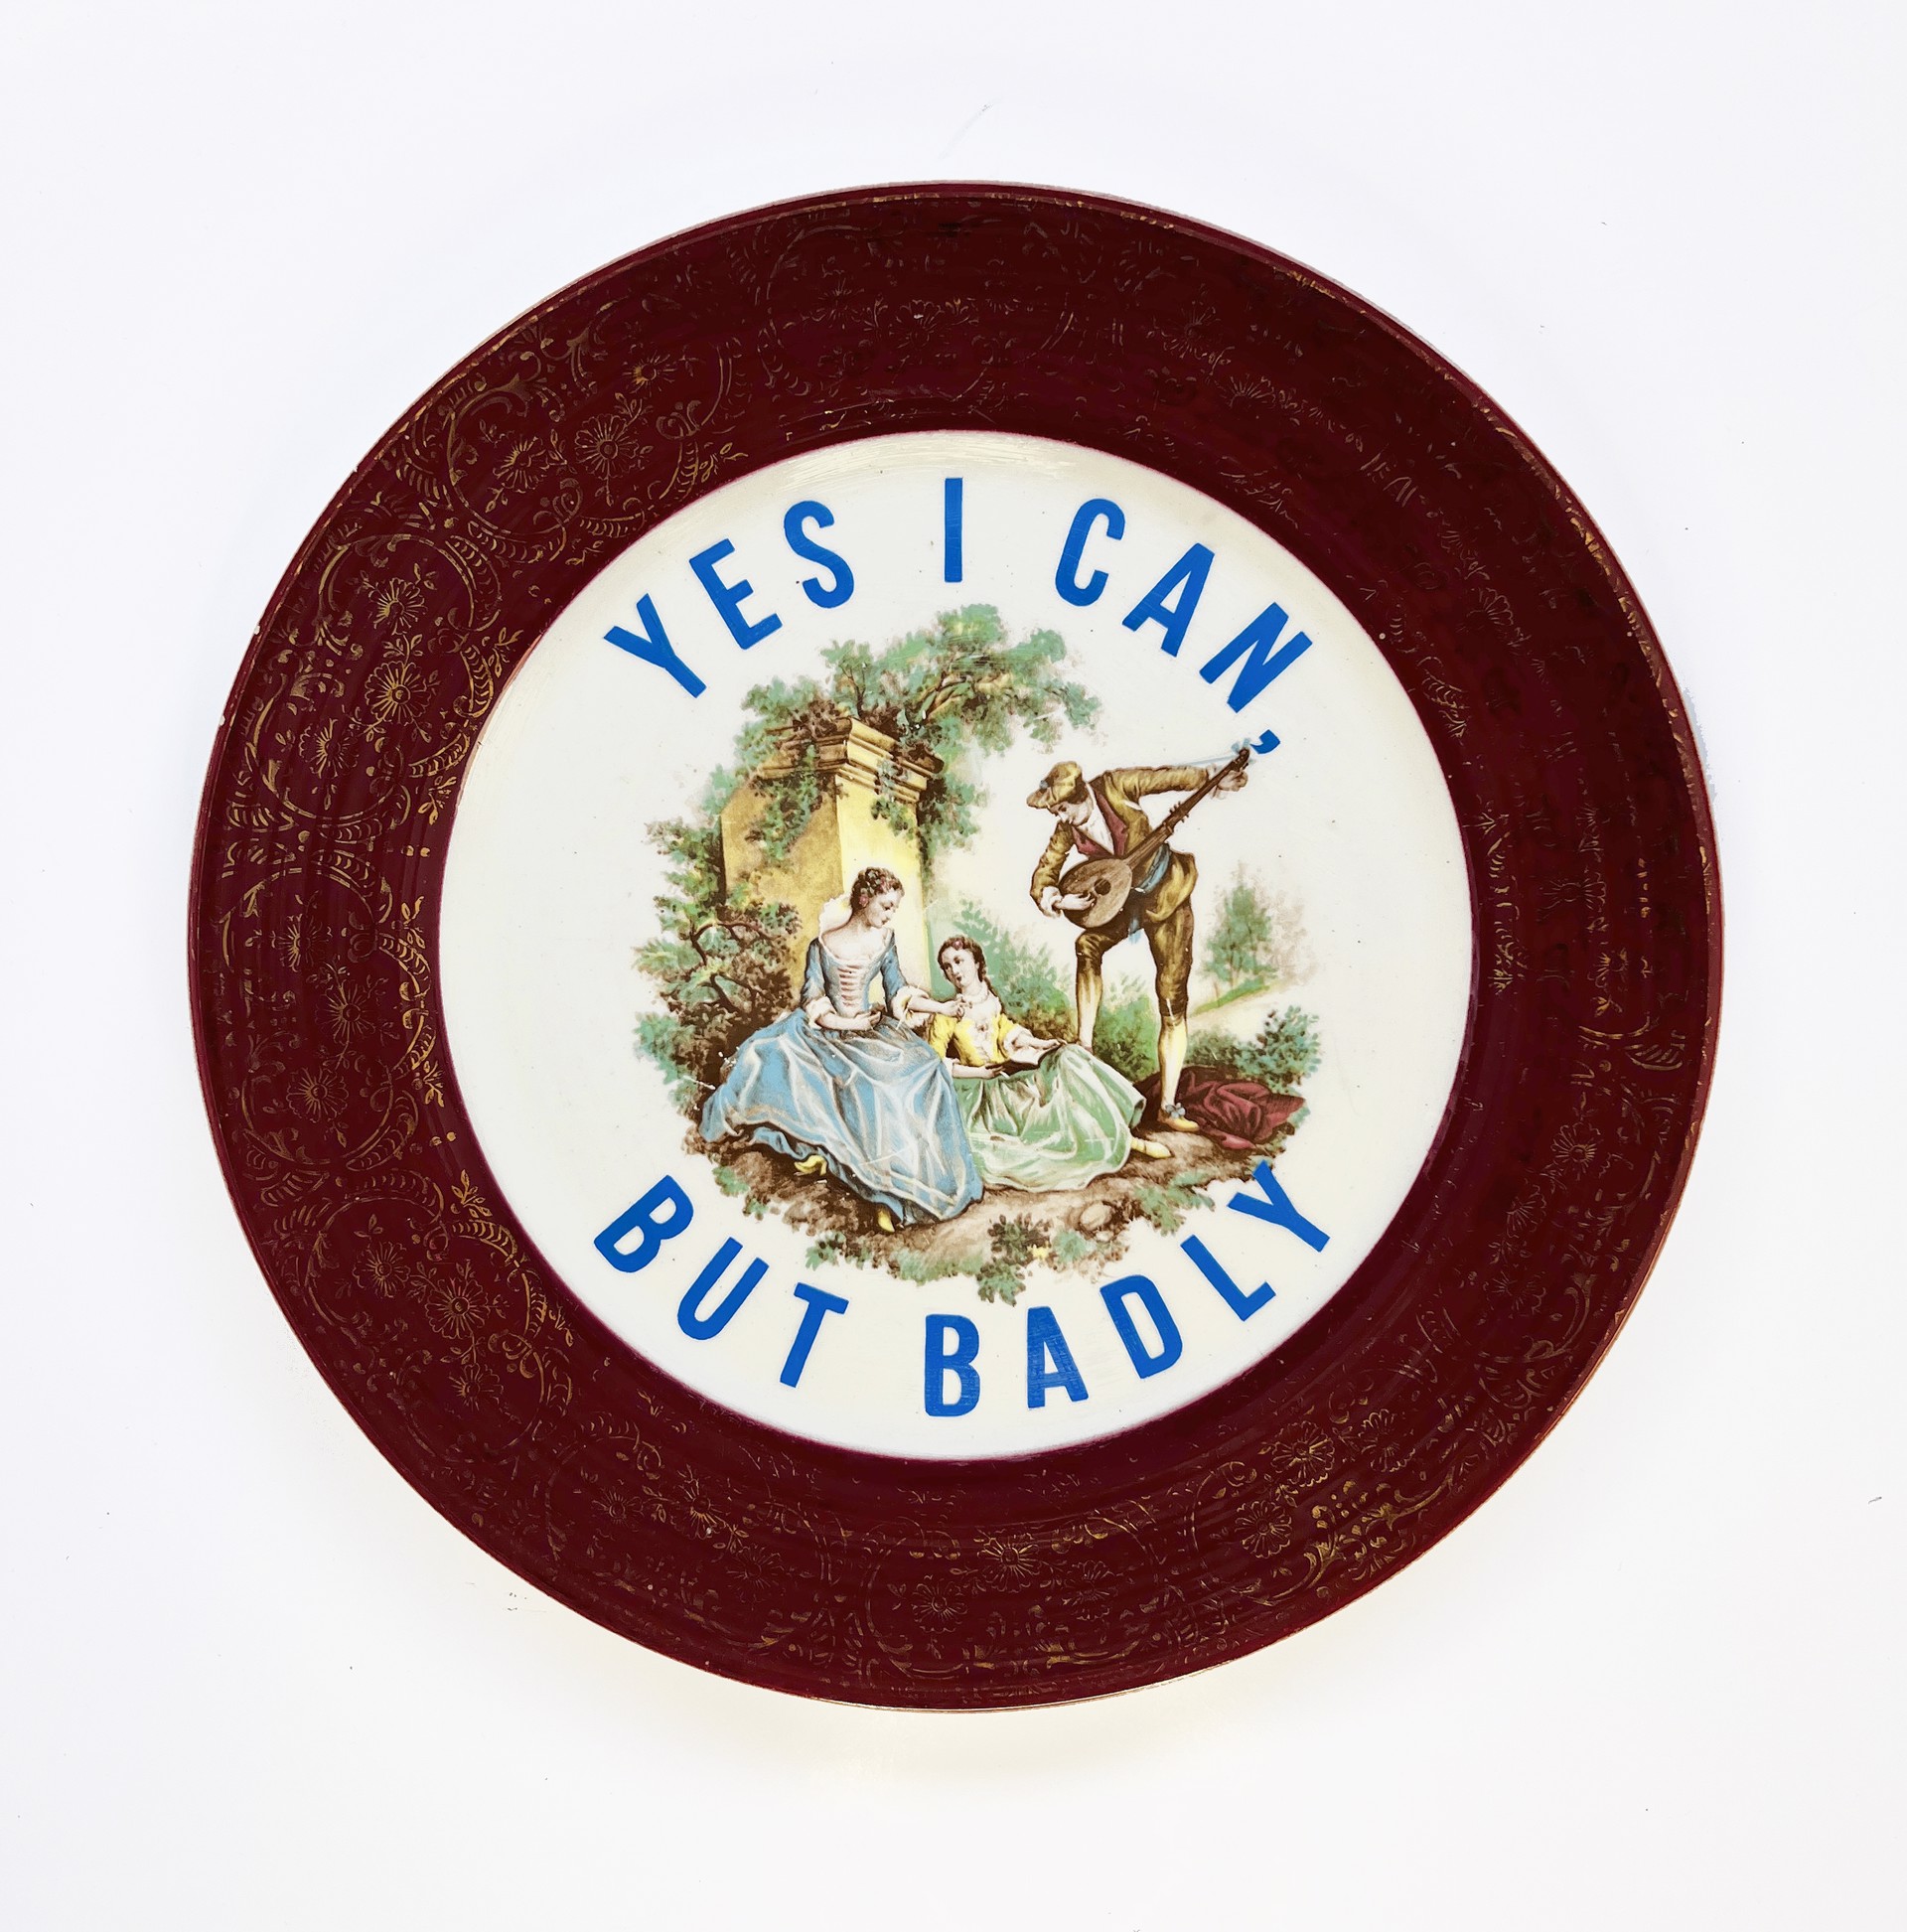 Yes I can, but badly (dinner plate) by Marie-Claude Marquis